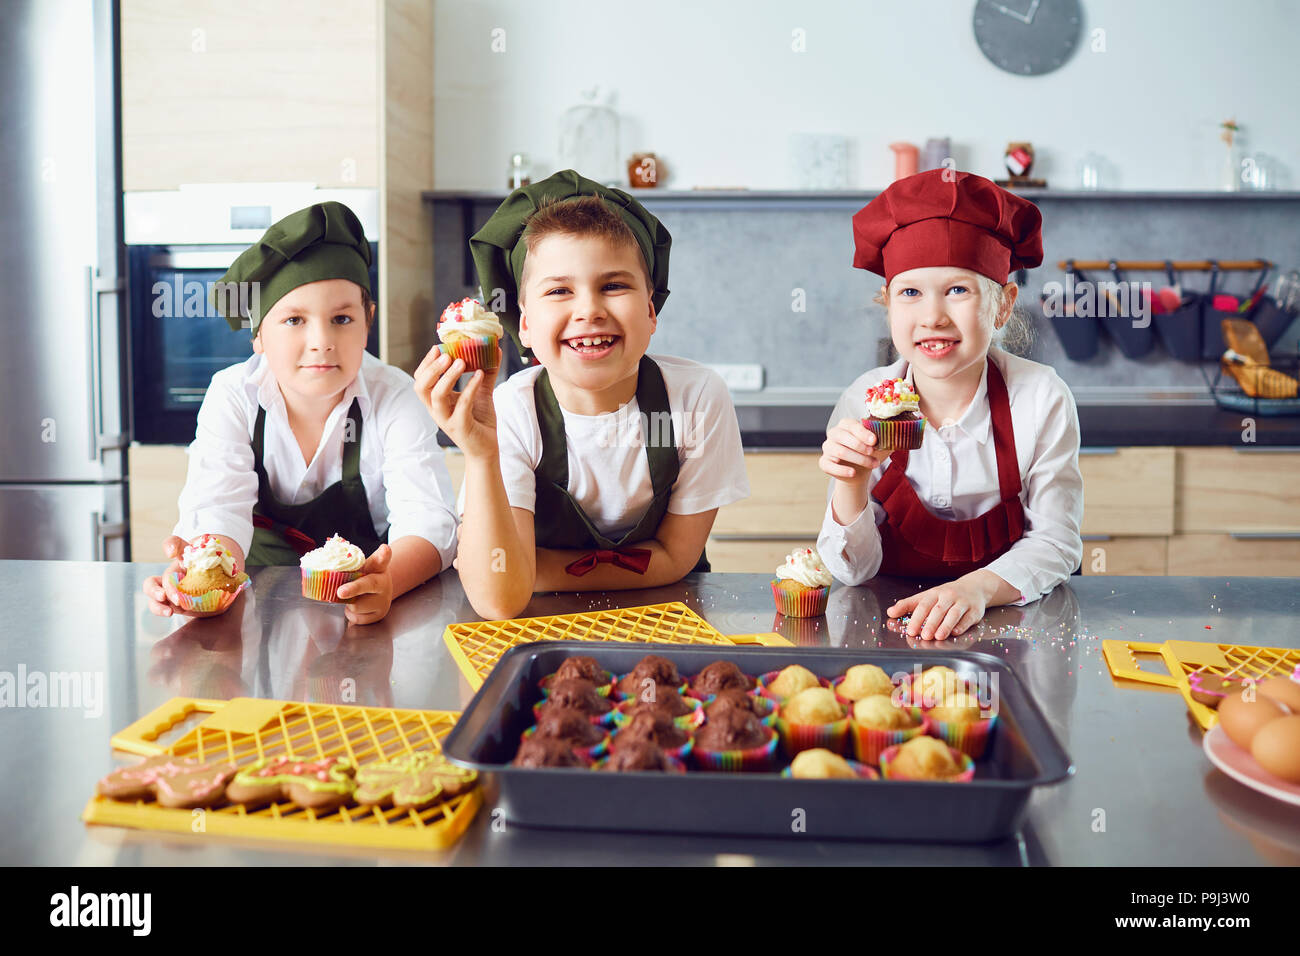 A group of children are cooking  in the kitchen. Stock Photo